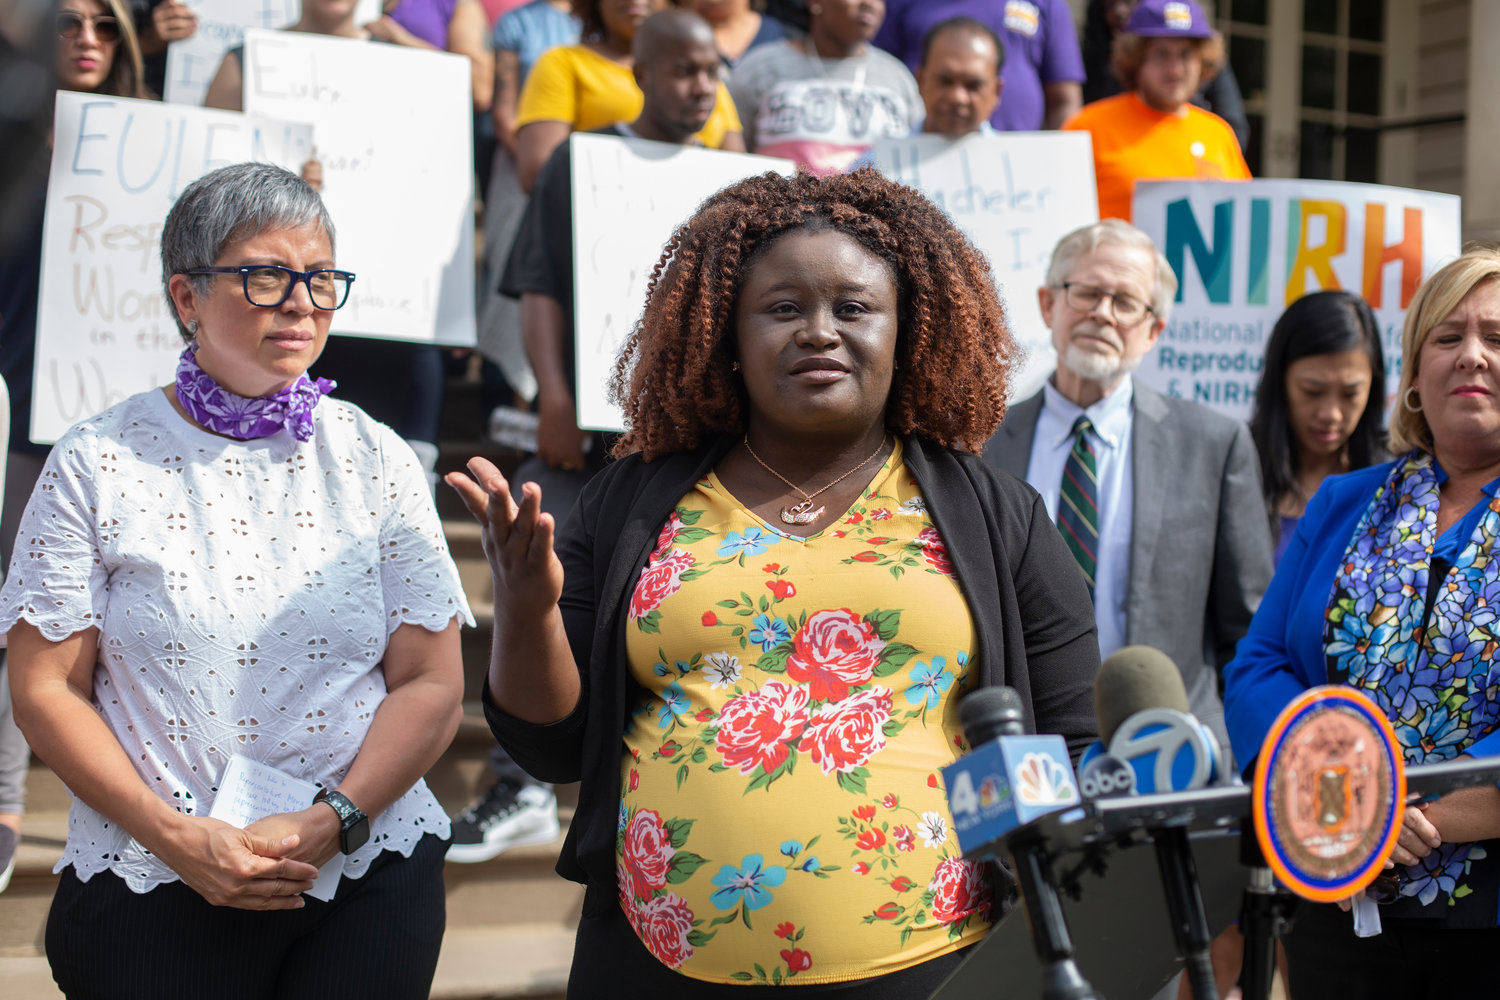 Advocates rallied at City Hall in 2019 in support of Hacheler Cyrille, pictured, who filed a pregnancy discrimination lawsuit against her employer. Organizations advocating for workers' and women's rights called for the passage of legislation that would make it illegal for employers to deny reasonable accommodations for pregnant workers, outside of Senator Chuck Schumer's Midtown office July 13.